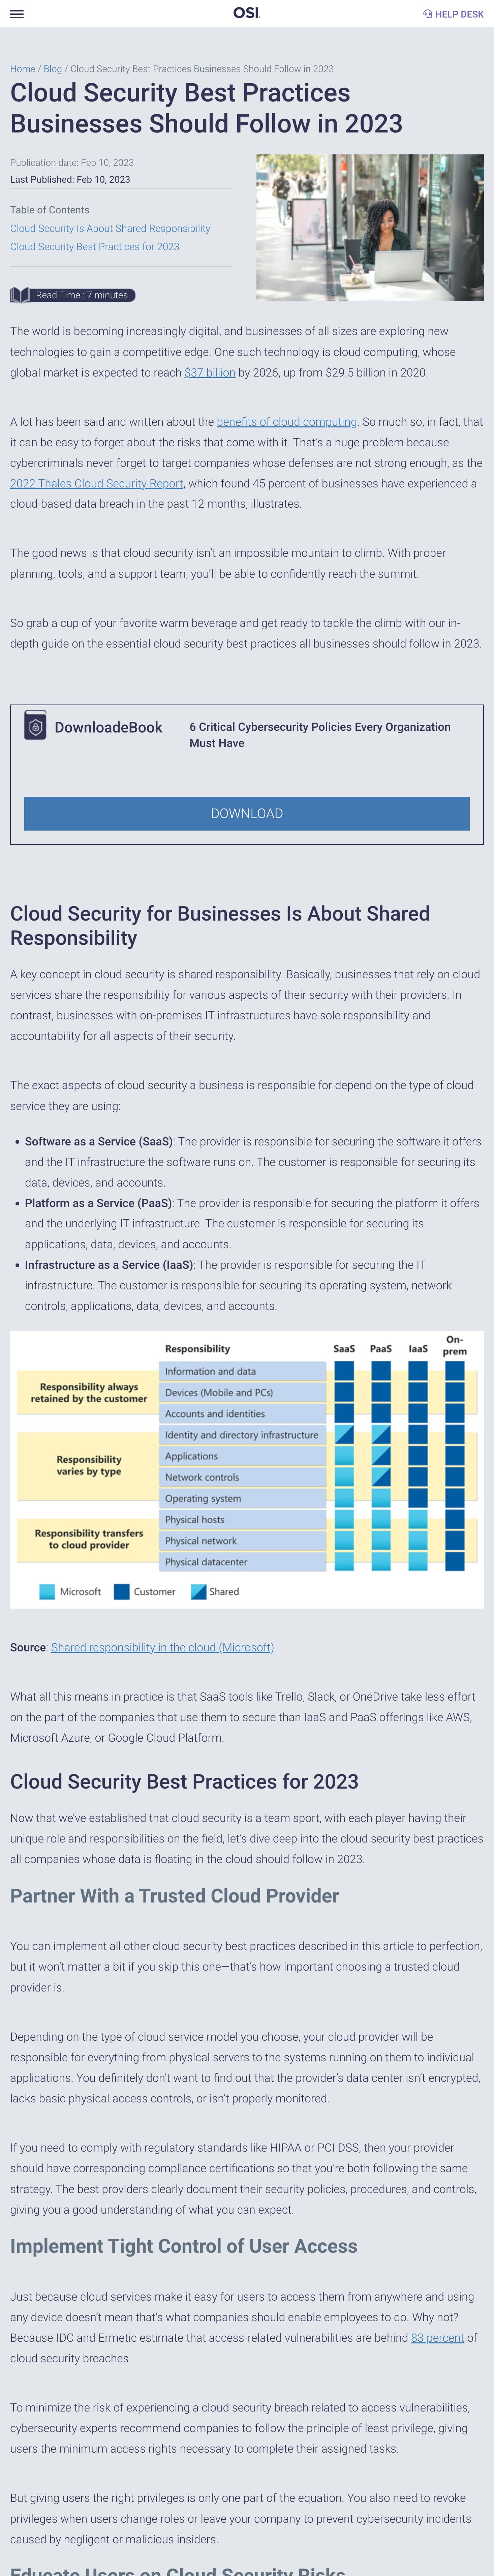 Cloud Security Best Practices Businesses Should Follow in 2023